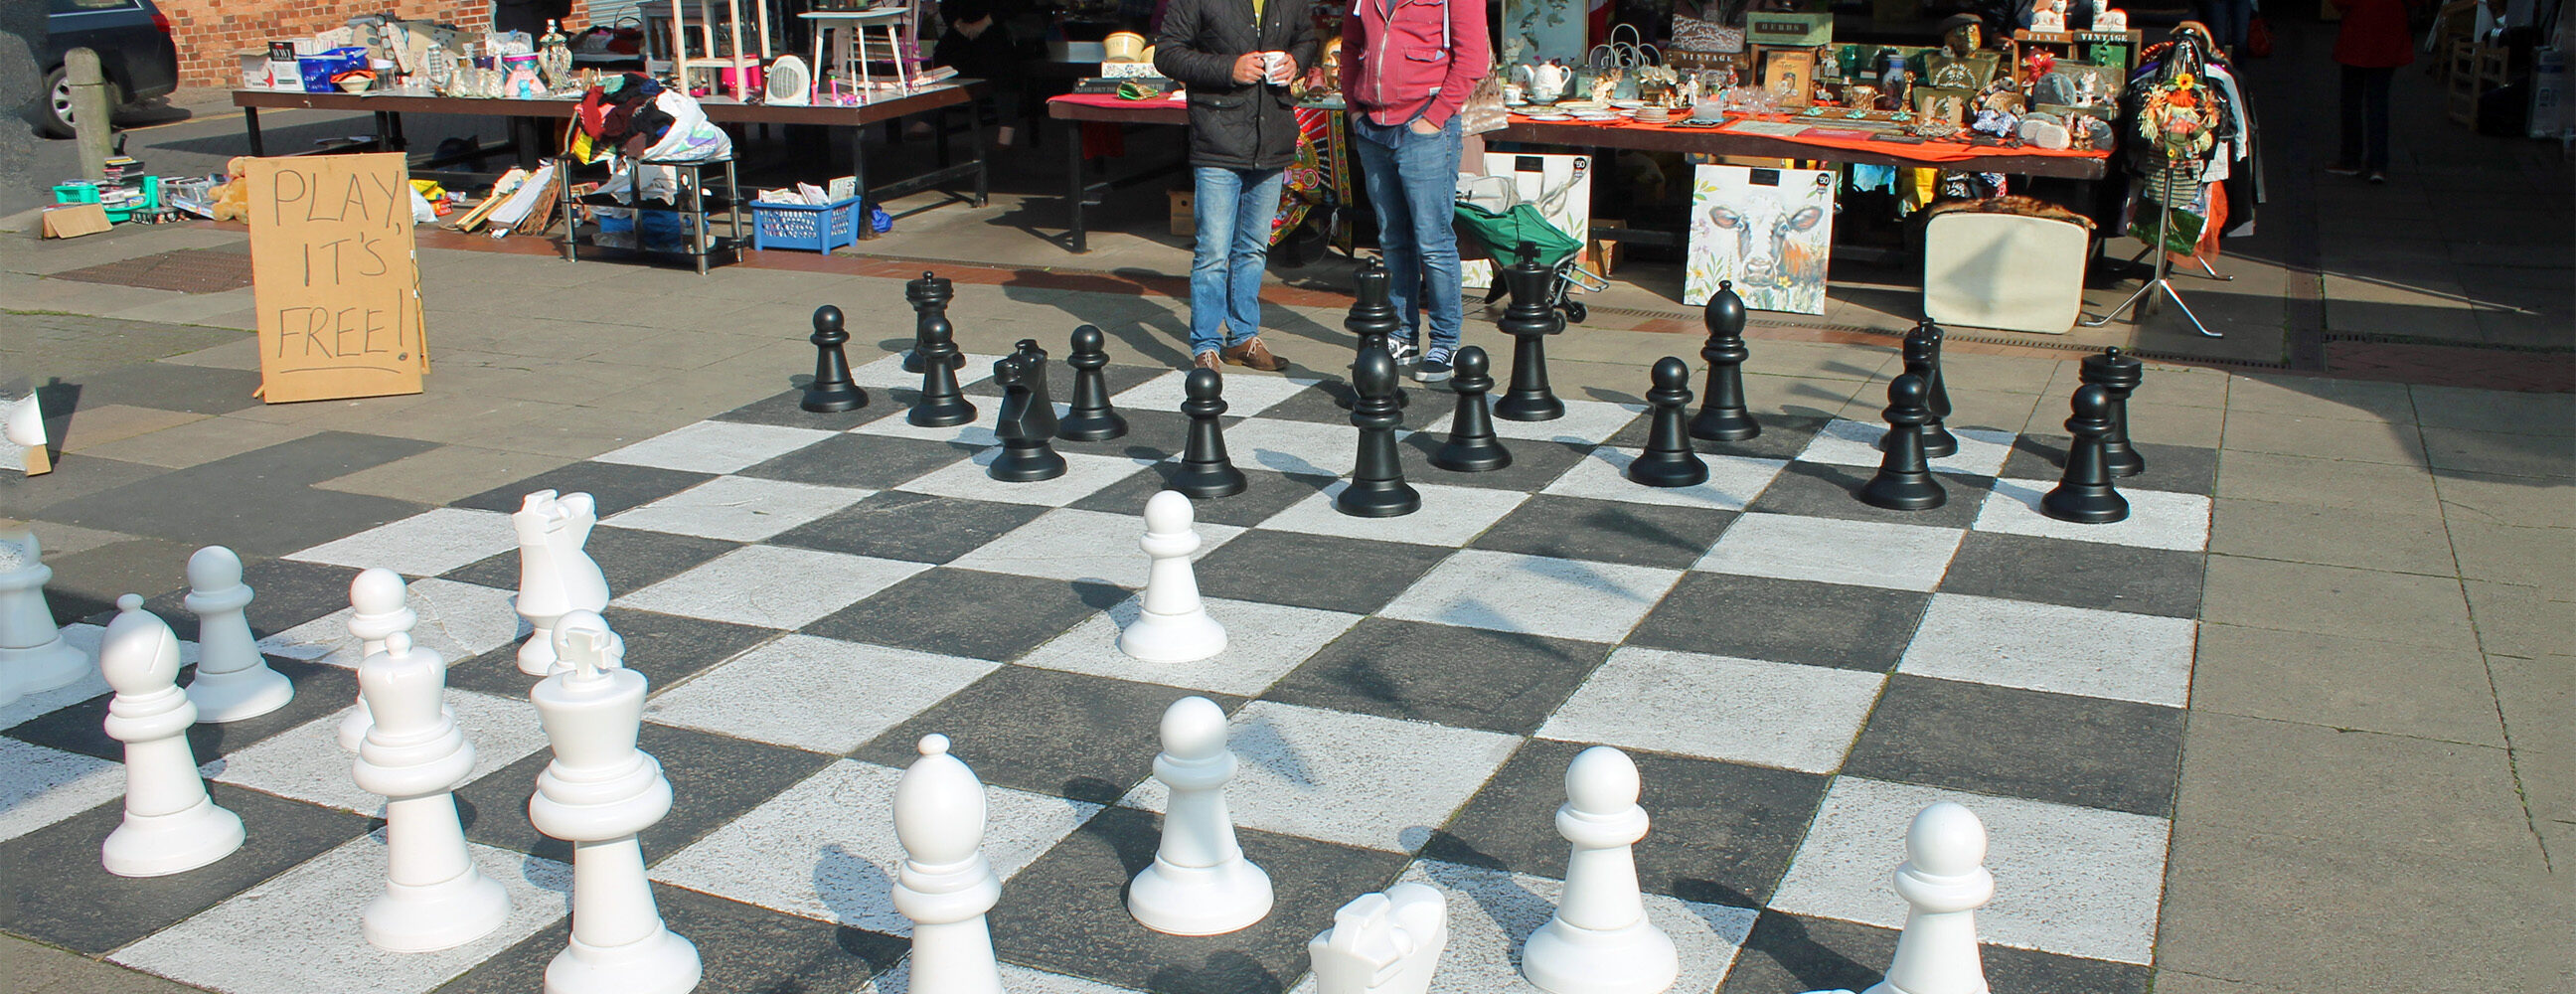 Two men playing giant chess at a market.